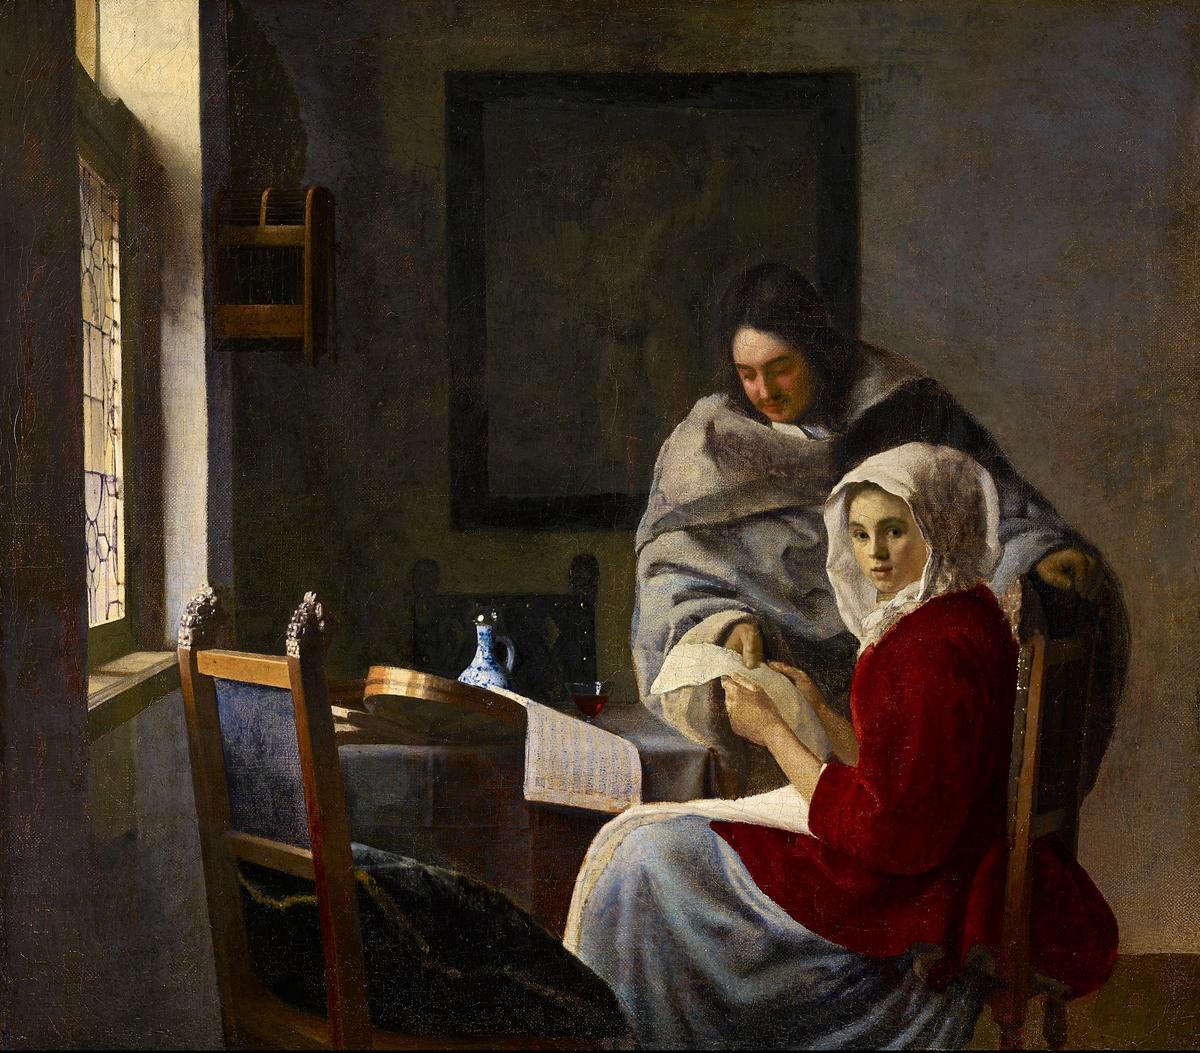 “Girl Interrupted at Her Music,” circa 1658–1659, by Johannes Vermeer. Oil on canvas. The Frick Collection, New York. (Public Domain)